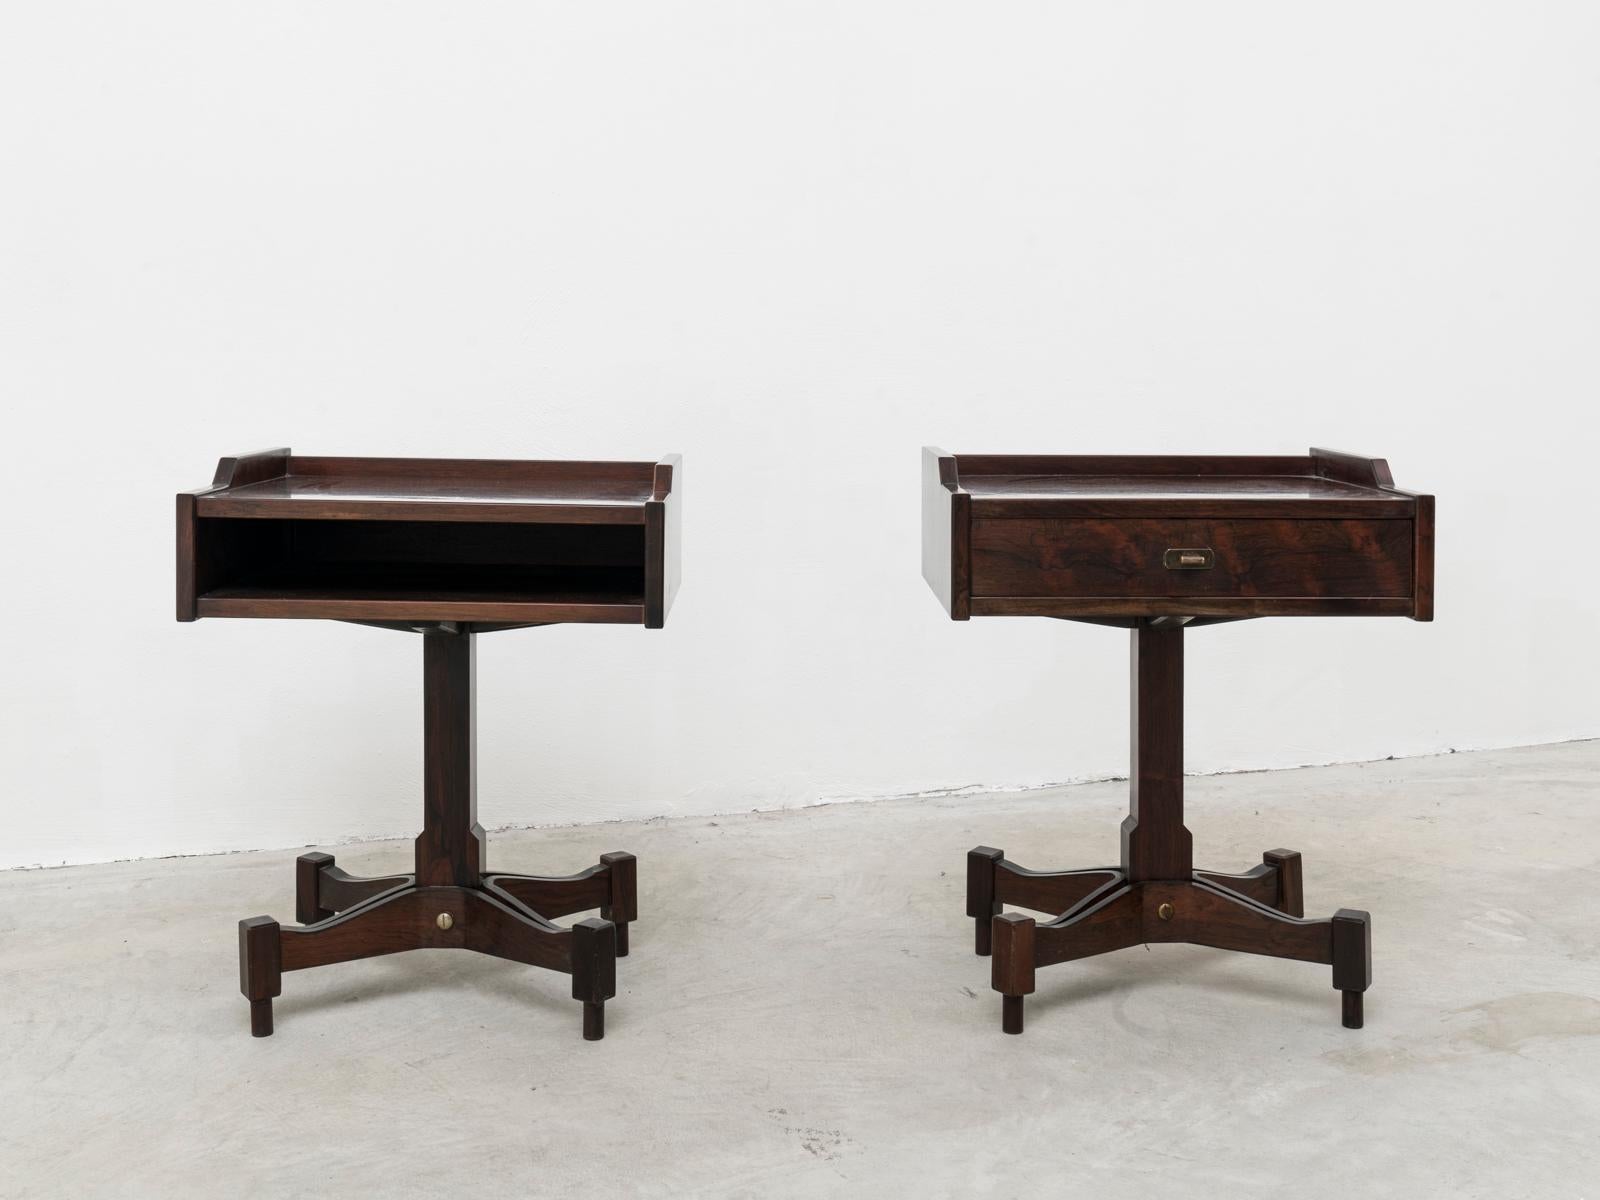 This pair of nightstands were designed by Italian architect, interior designer and professor Claudio Salocchi for Sormani in 1962. They are catalogued as model SC-50, also known as 